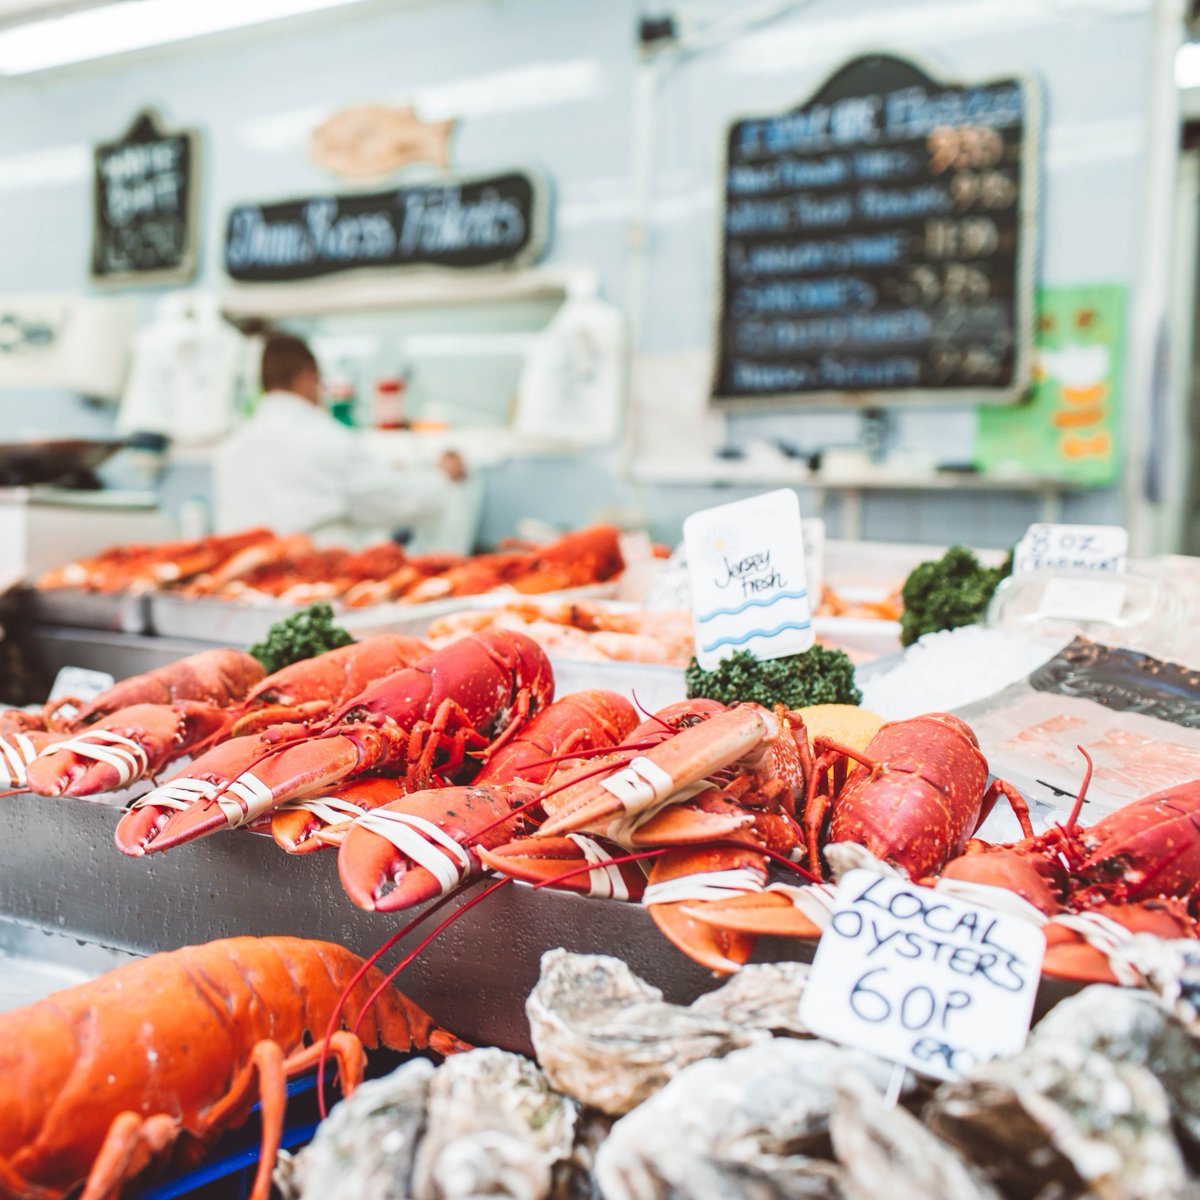 Jersey is the ultimate foodie destination full of locally sourced, seasonal produce. From #JerseyRoyals to Jersey dairy to Jersey rock oysters and all of the other fresh seafood available, there really is something for everyone. Delicious! 📷 @visitjerseyci